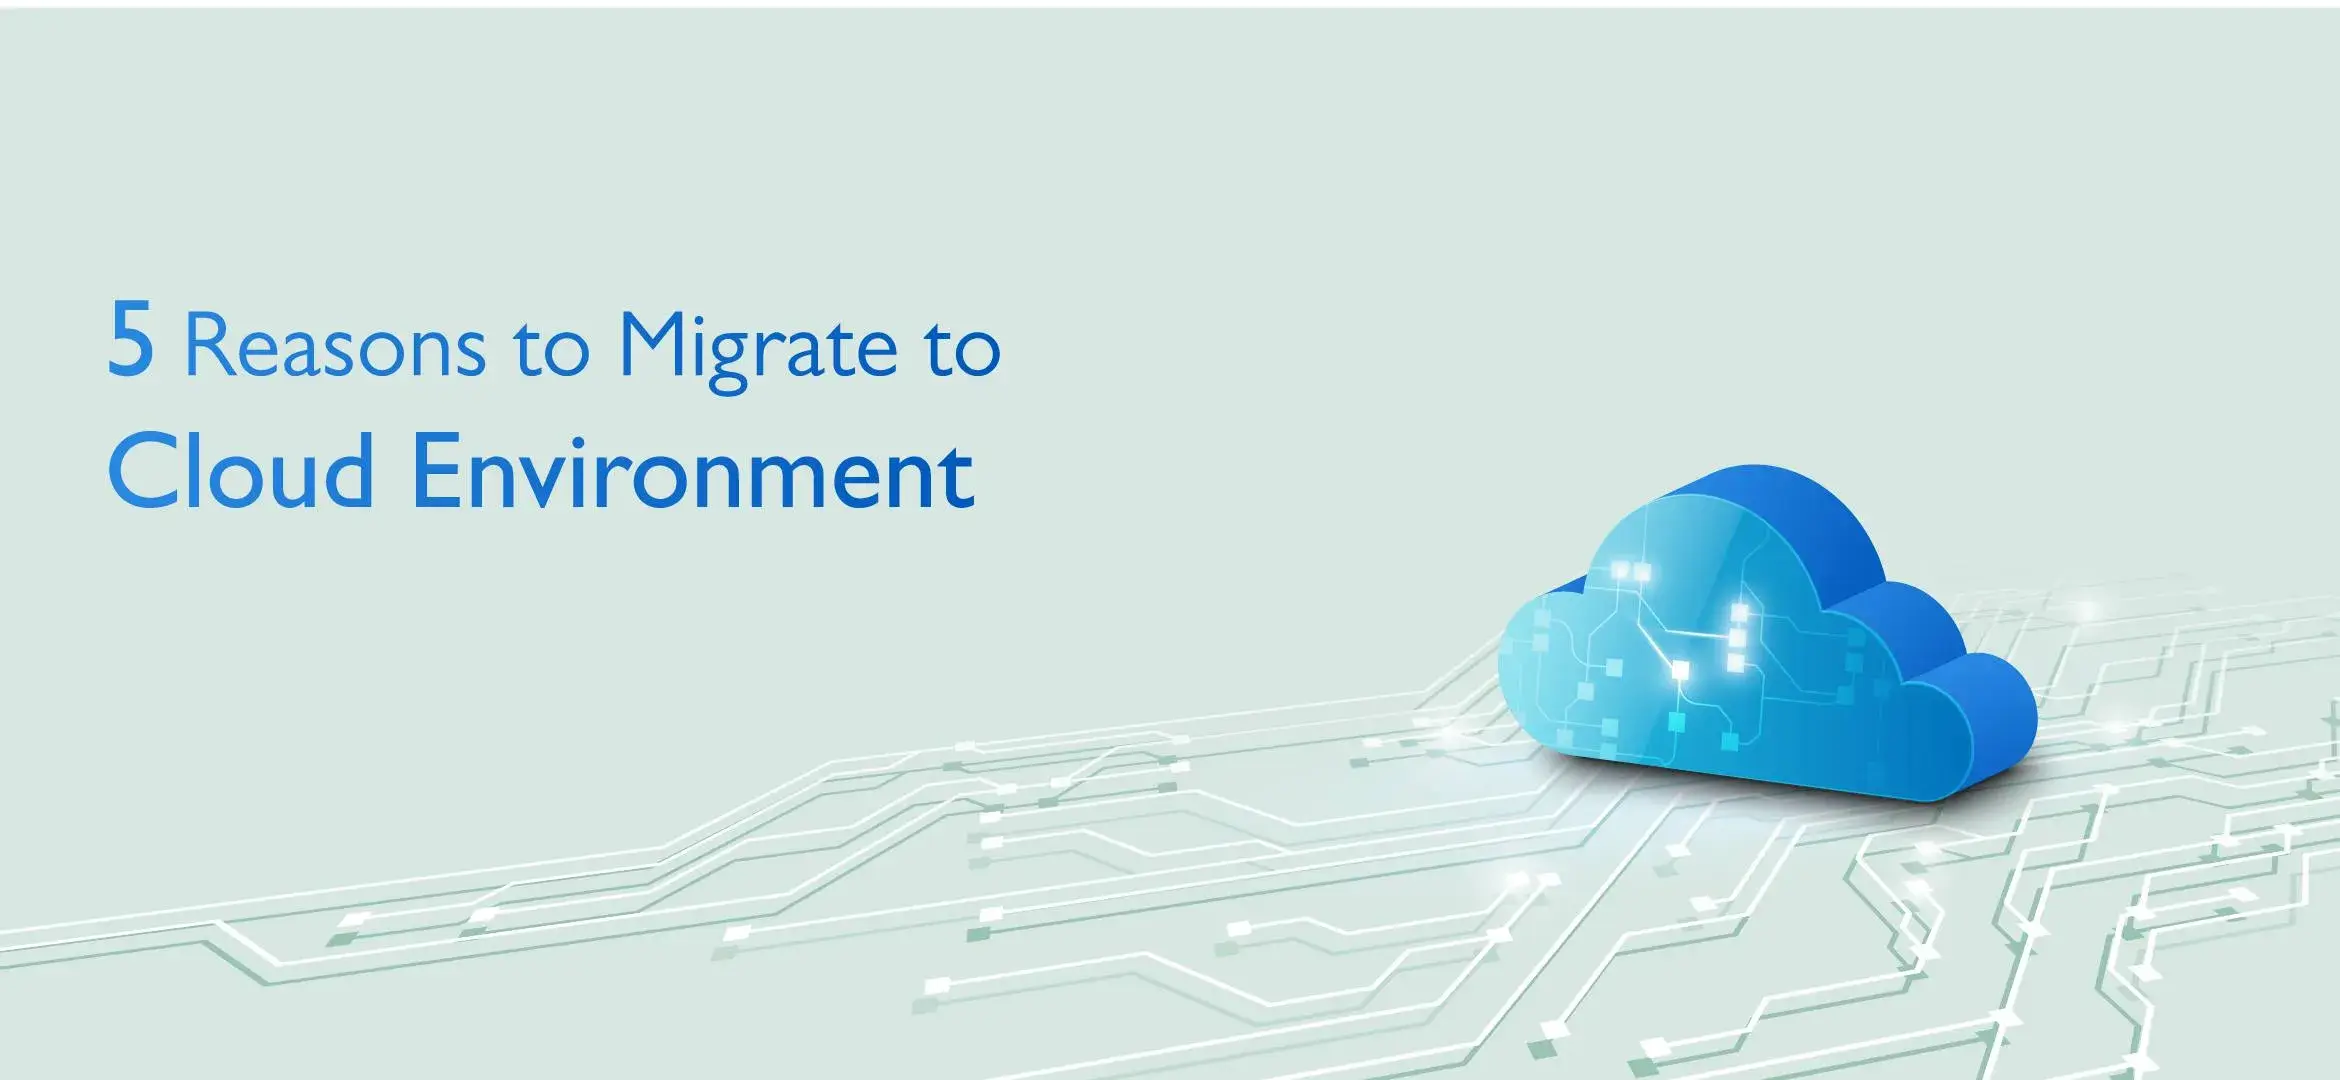 5 Reasons to Migrate to Cloud Environment